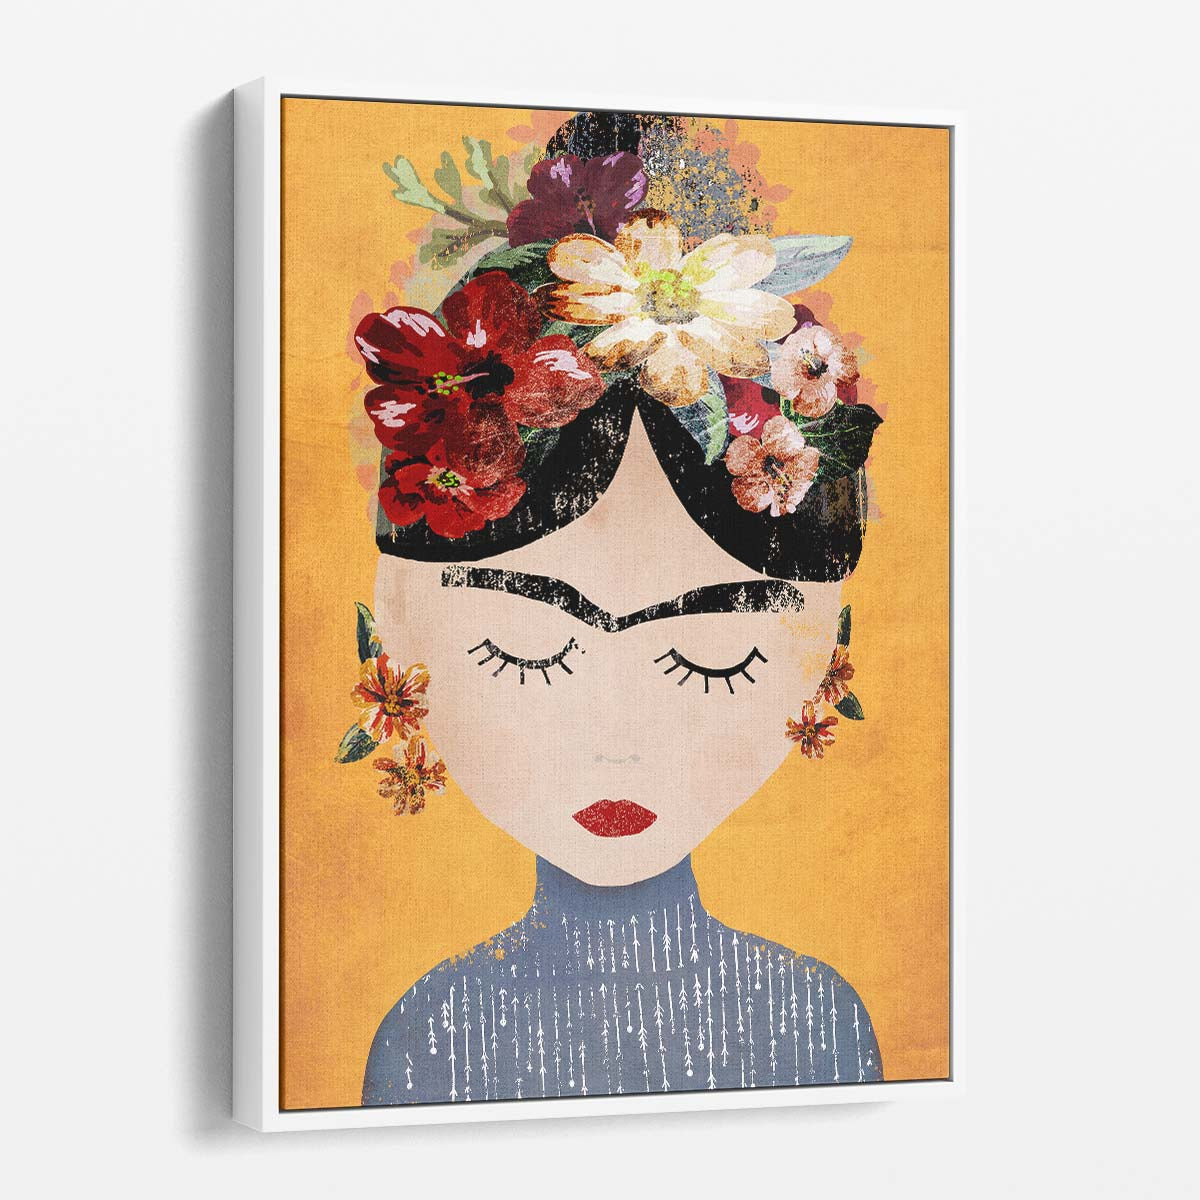 Frida Kahlo Floral Portrait Illustration by Treechild in Yellow by Luxuriance Designs, made in USA